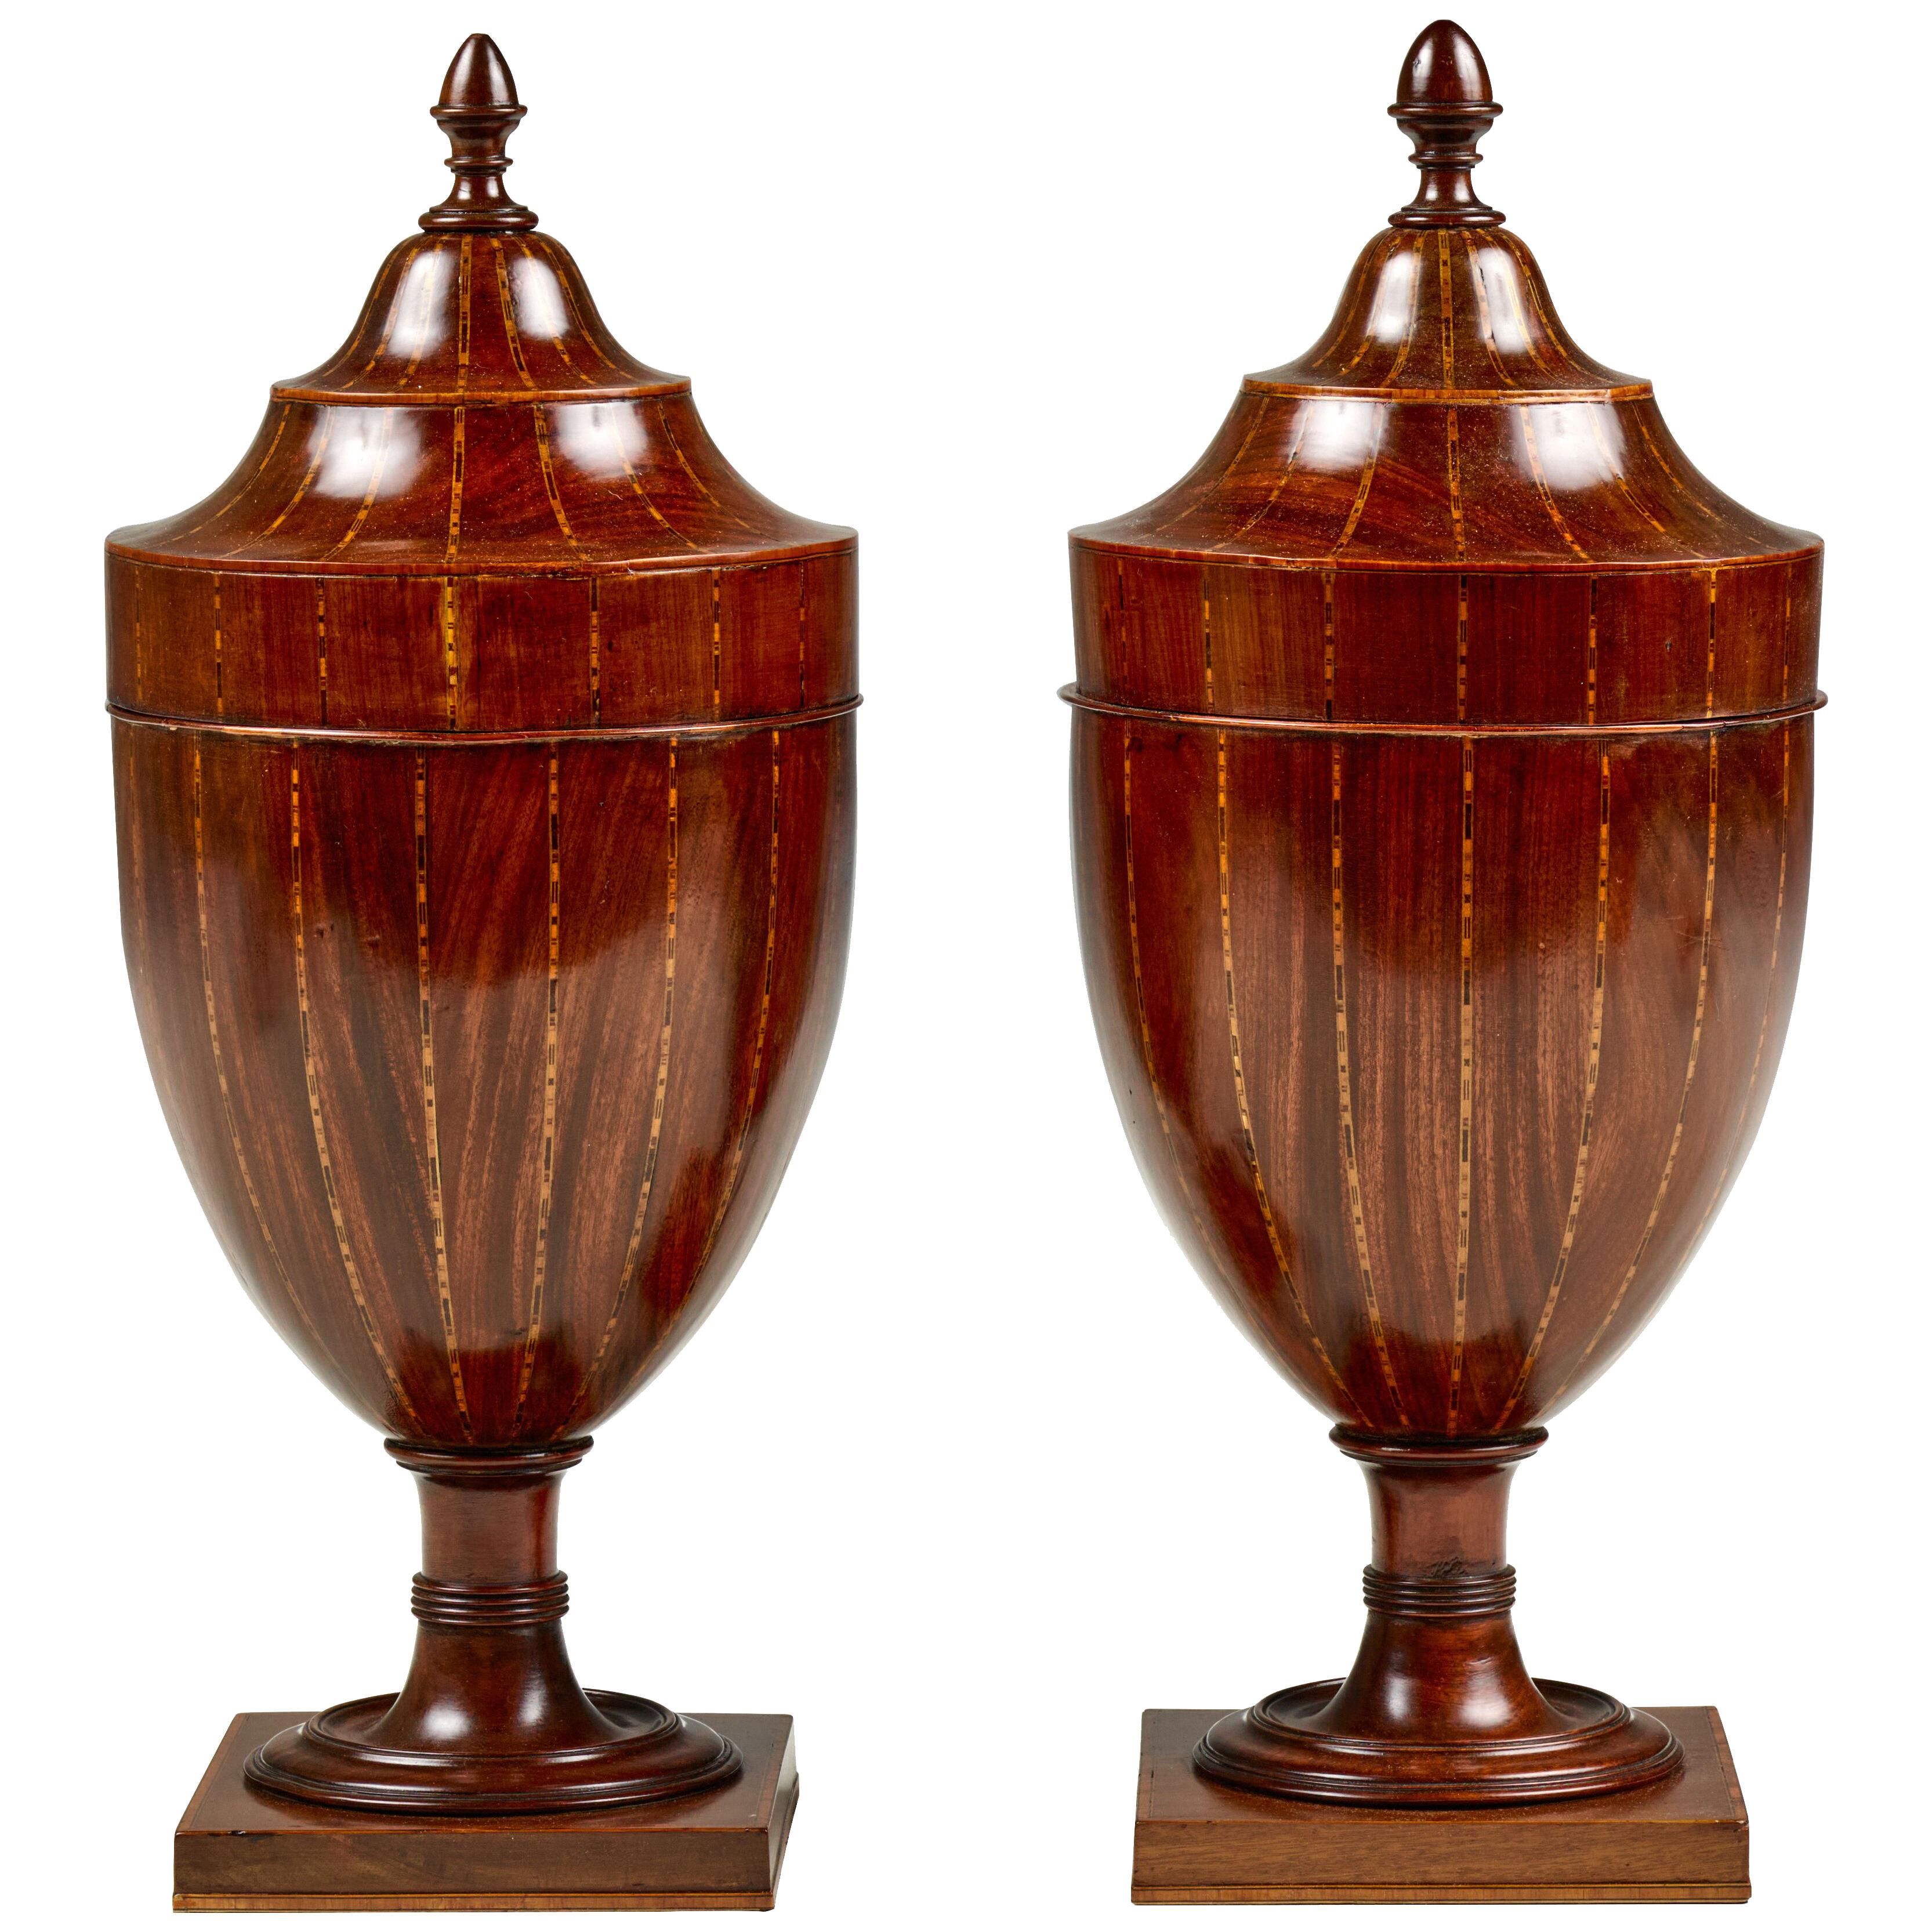 A Pair of Monumental Inlaid Urn Form Knife Boxes